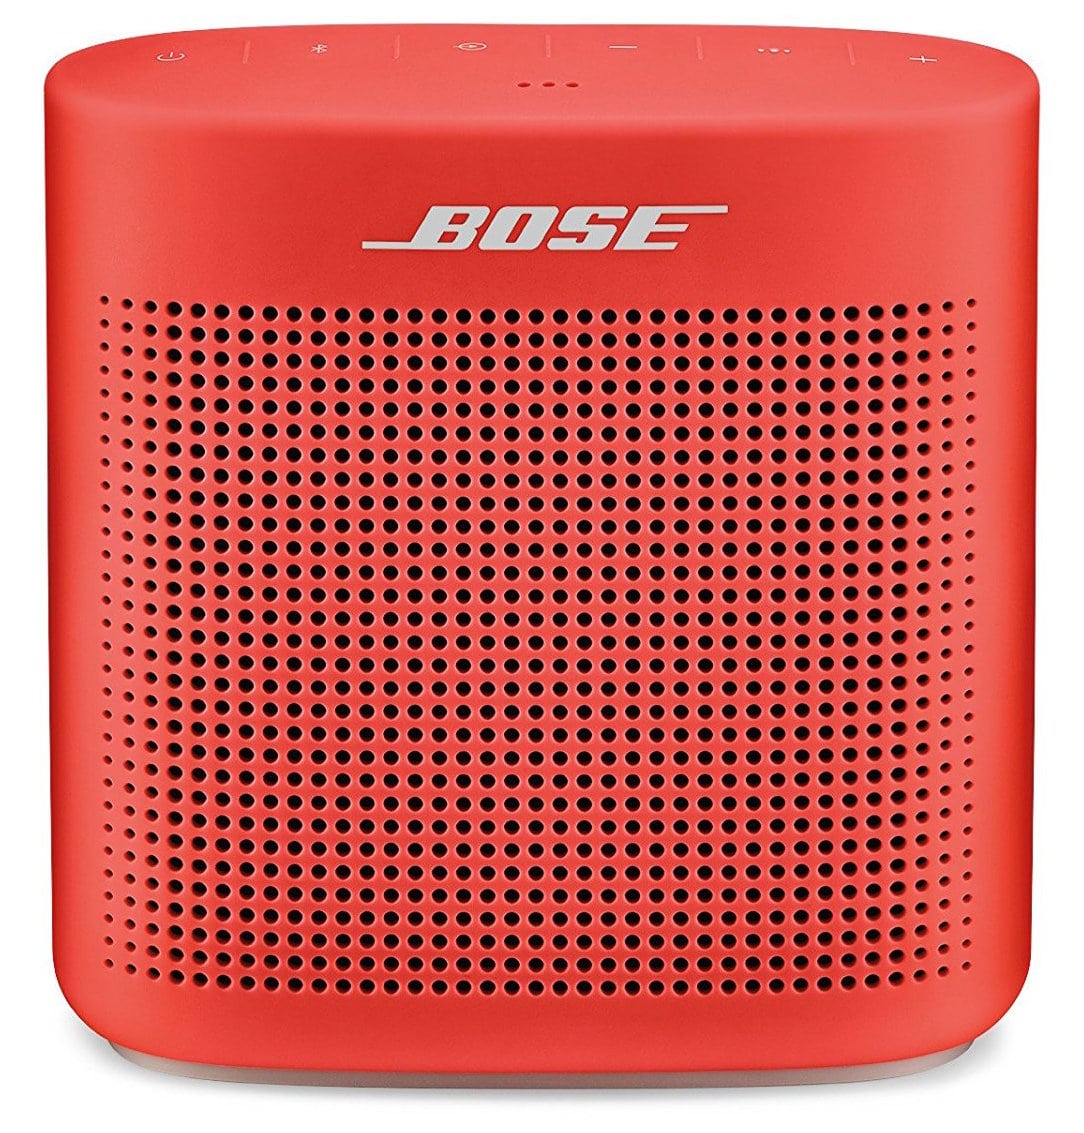 Best Bluetooth Wireless Portable Spakers 2017: Bose in Red